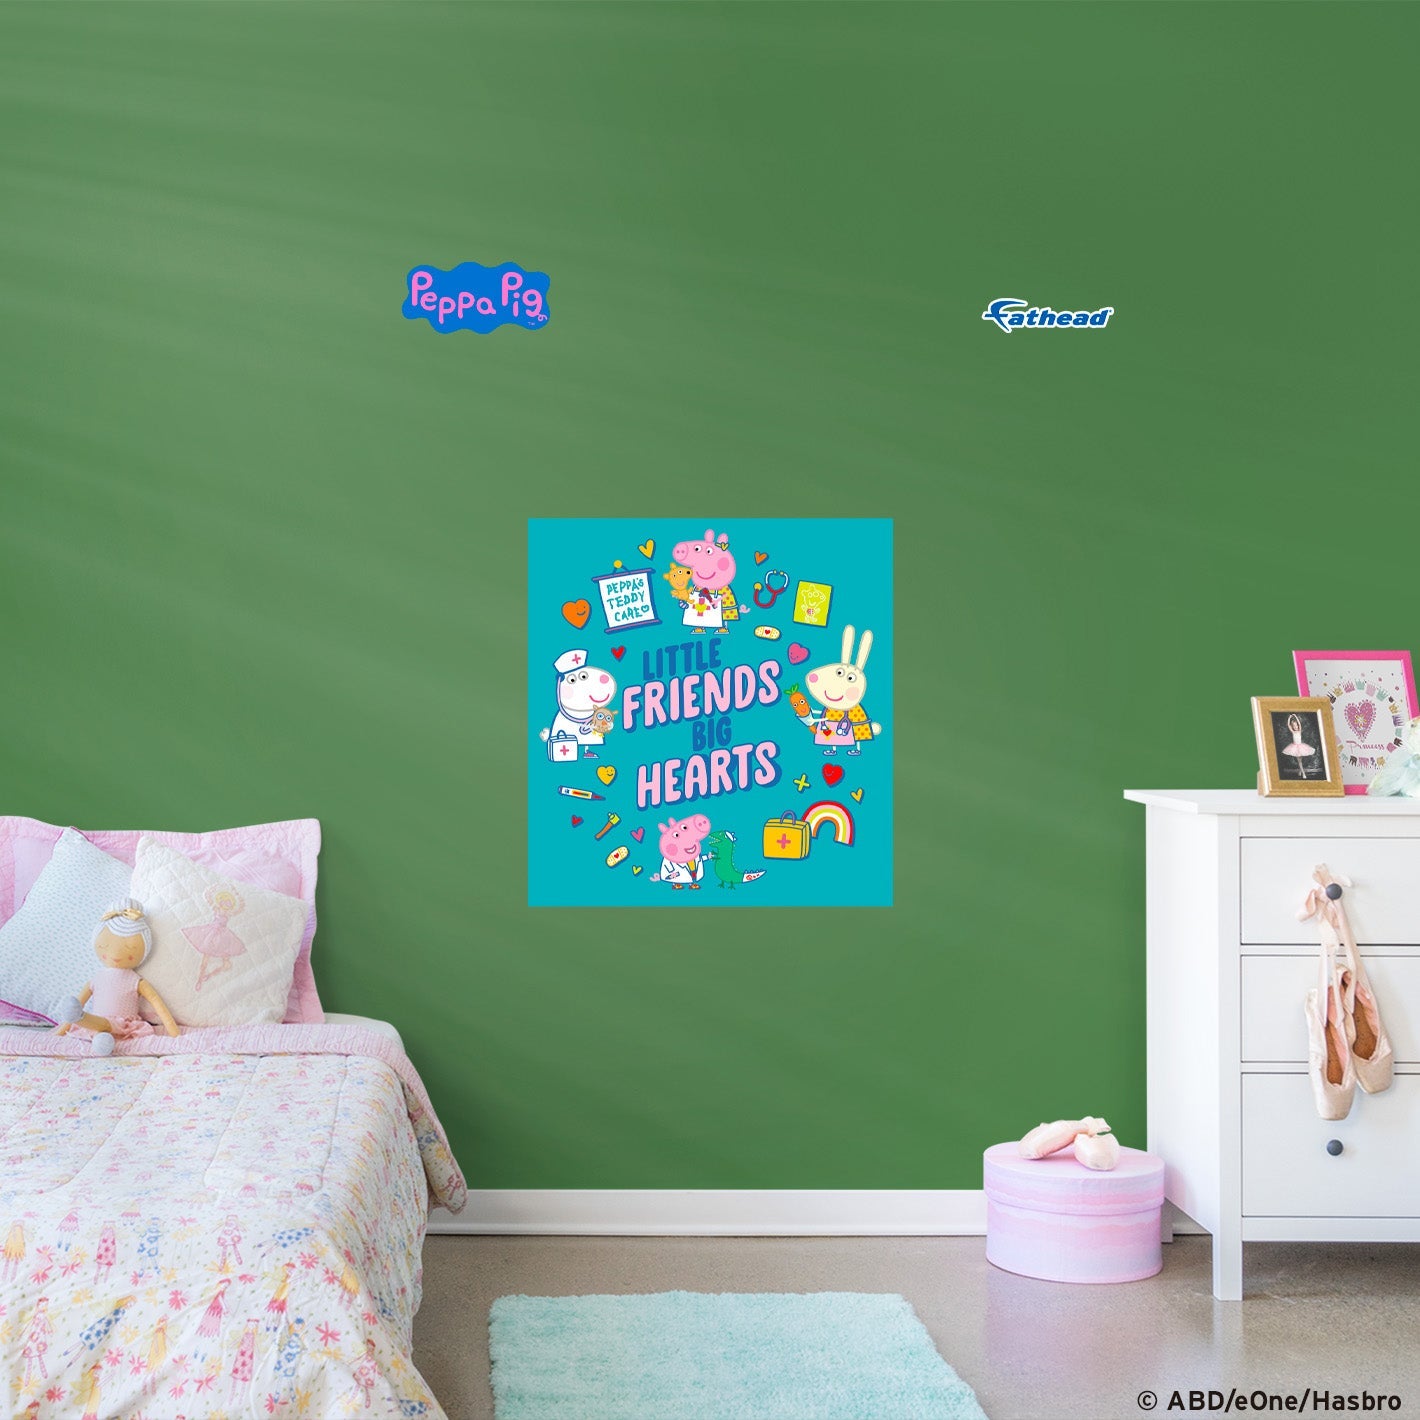 Peppa Pig: Peppa's Teddy Care Poster - Officially Licensed Hasbro Removable Adhesive Decal